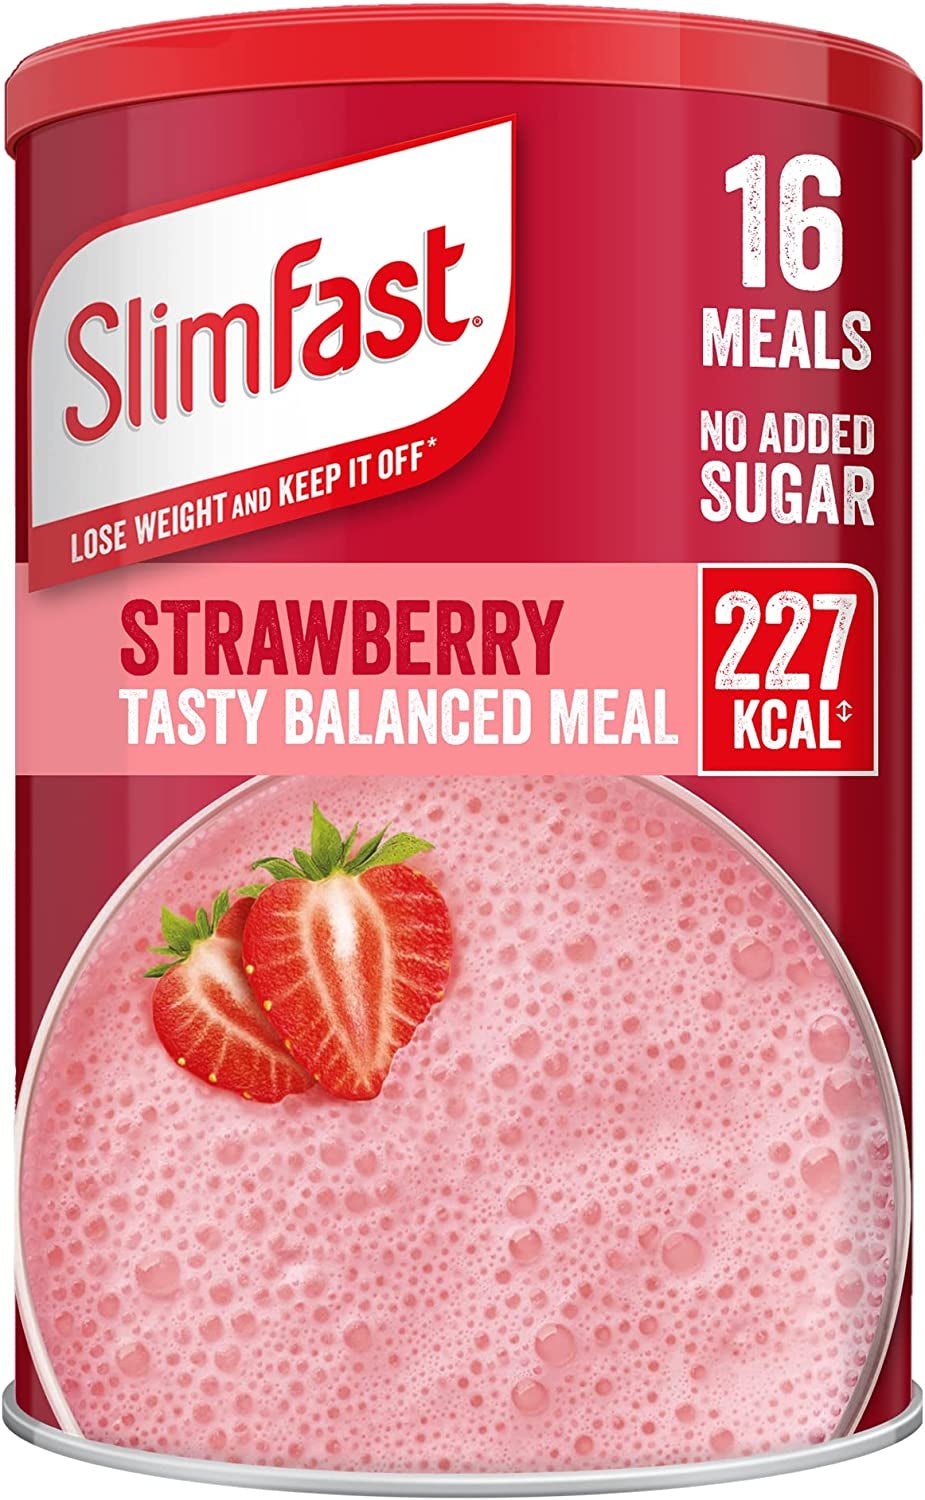 Balanced Meal Shake, Healthy Shake for Balanced Diet Plan with Vitamins and Minerals, High in Fibre, Meal Replacement, Strawberry Flavour, 16 Servings, 584 G - FoxMart™️ - FoxMart™️